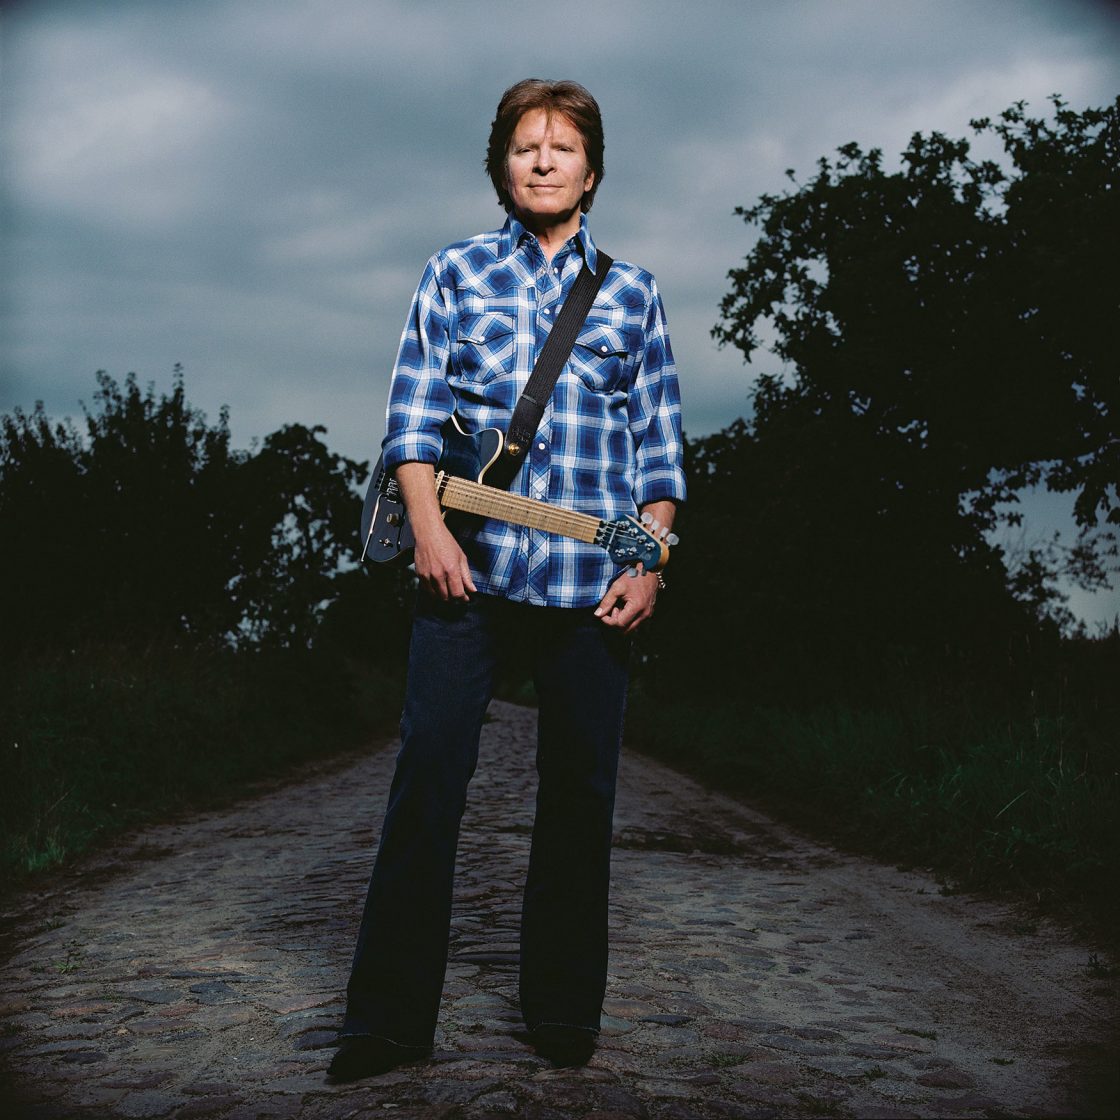 Due to strong demand, John Fogerty adds second St. John’s show